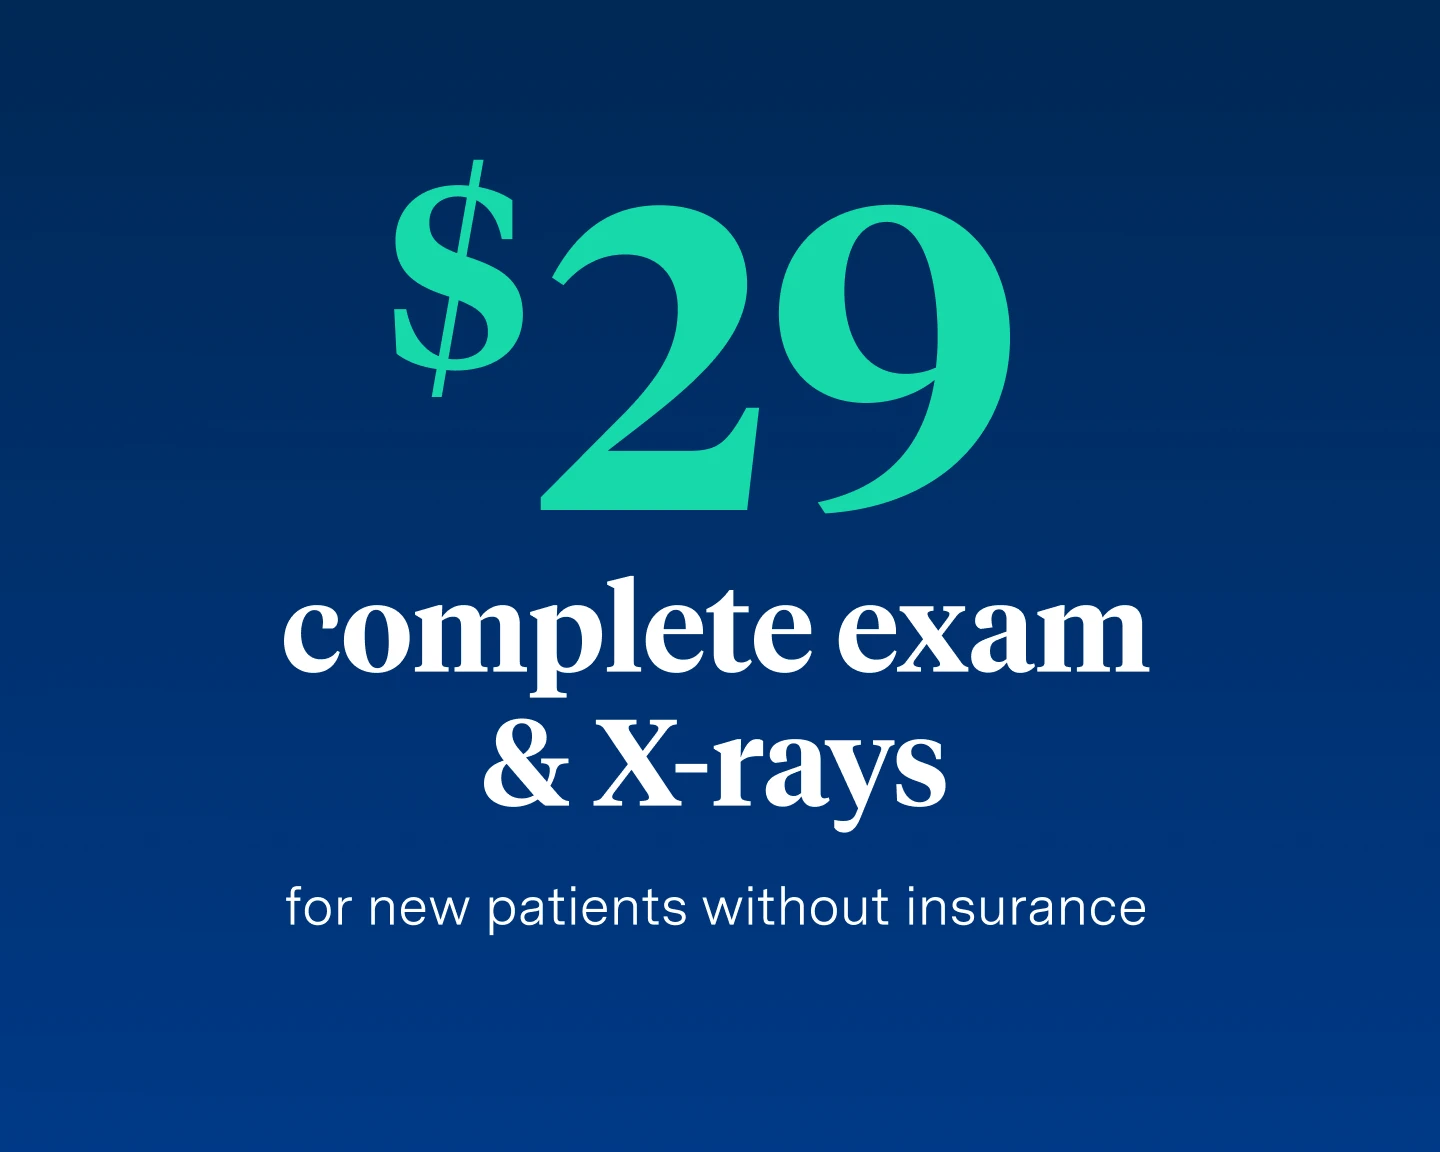 $29 complete exam & X-rays for new patients without insurance. 